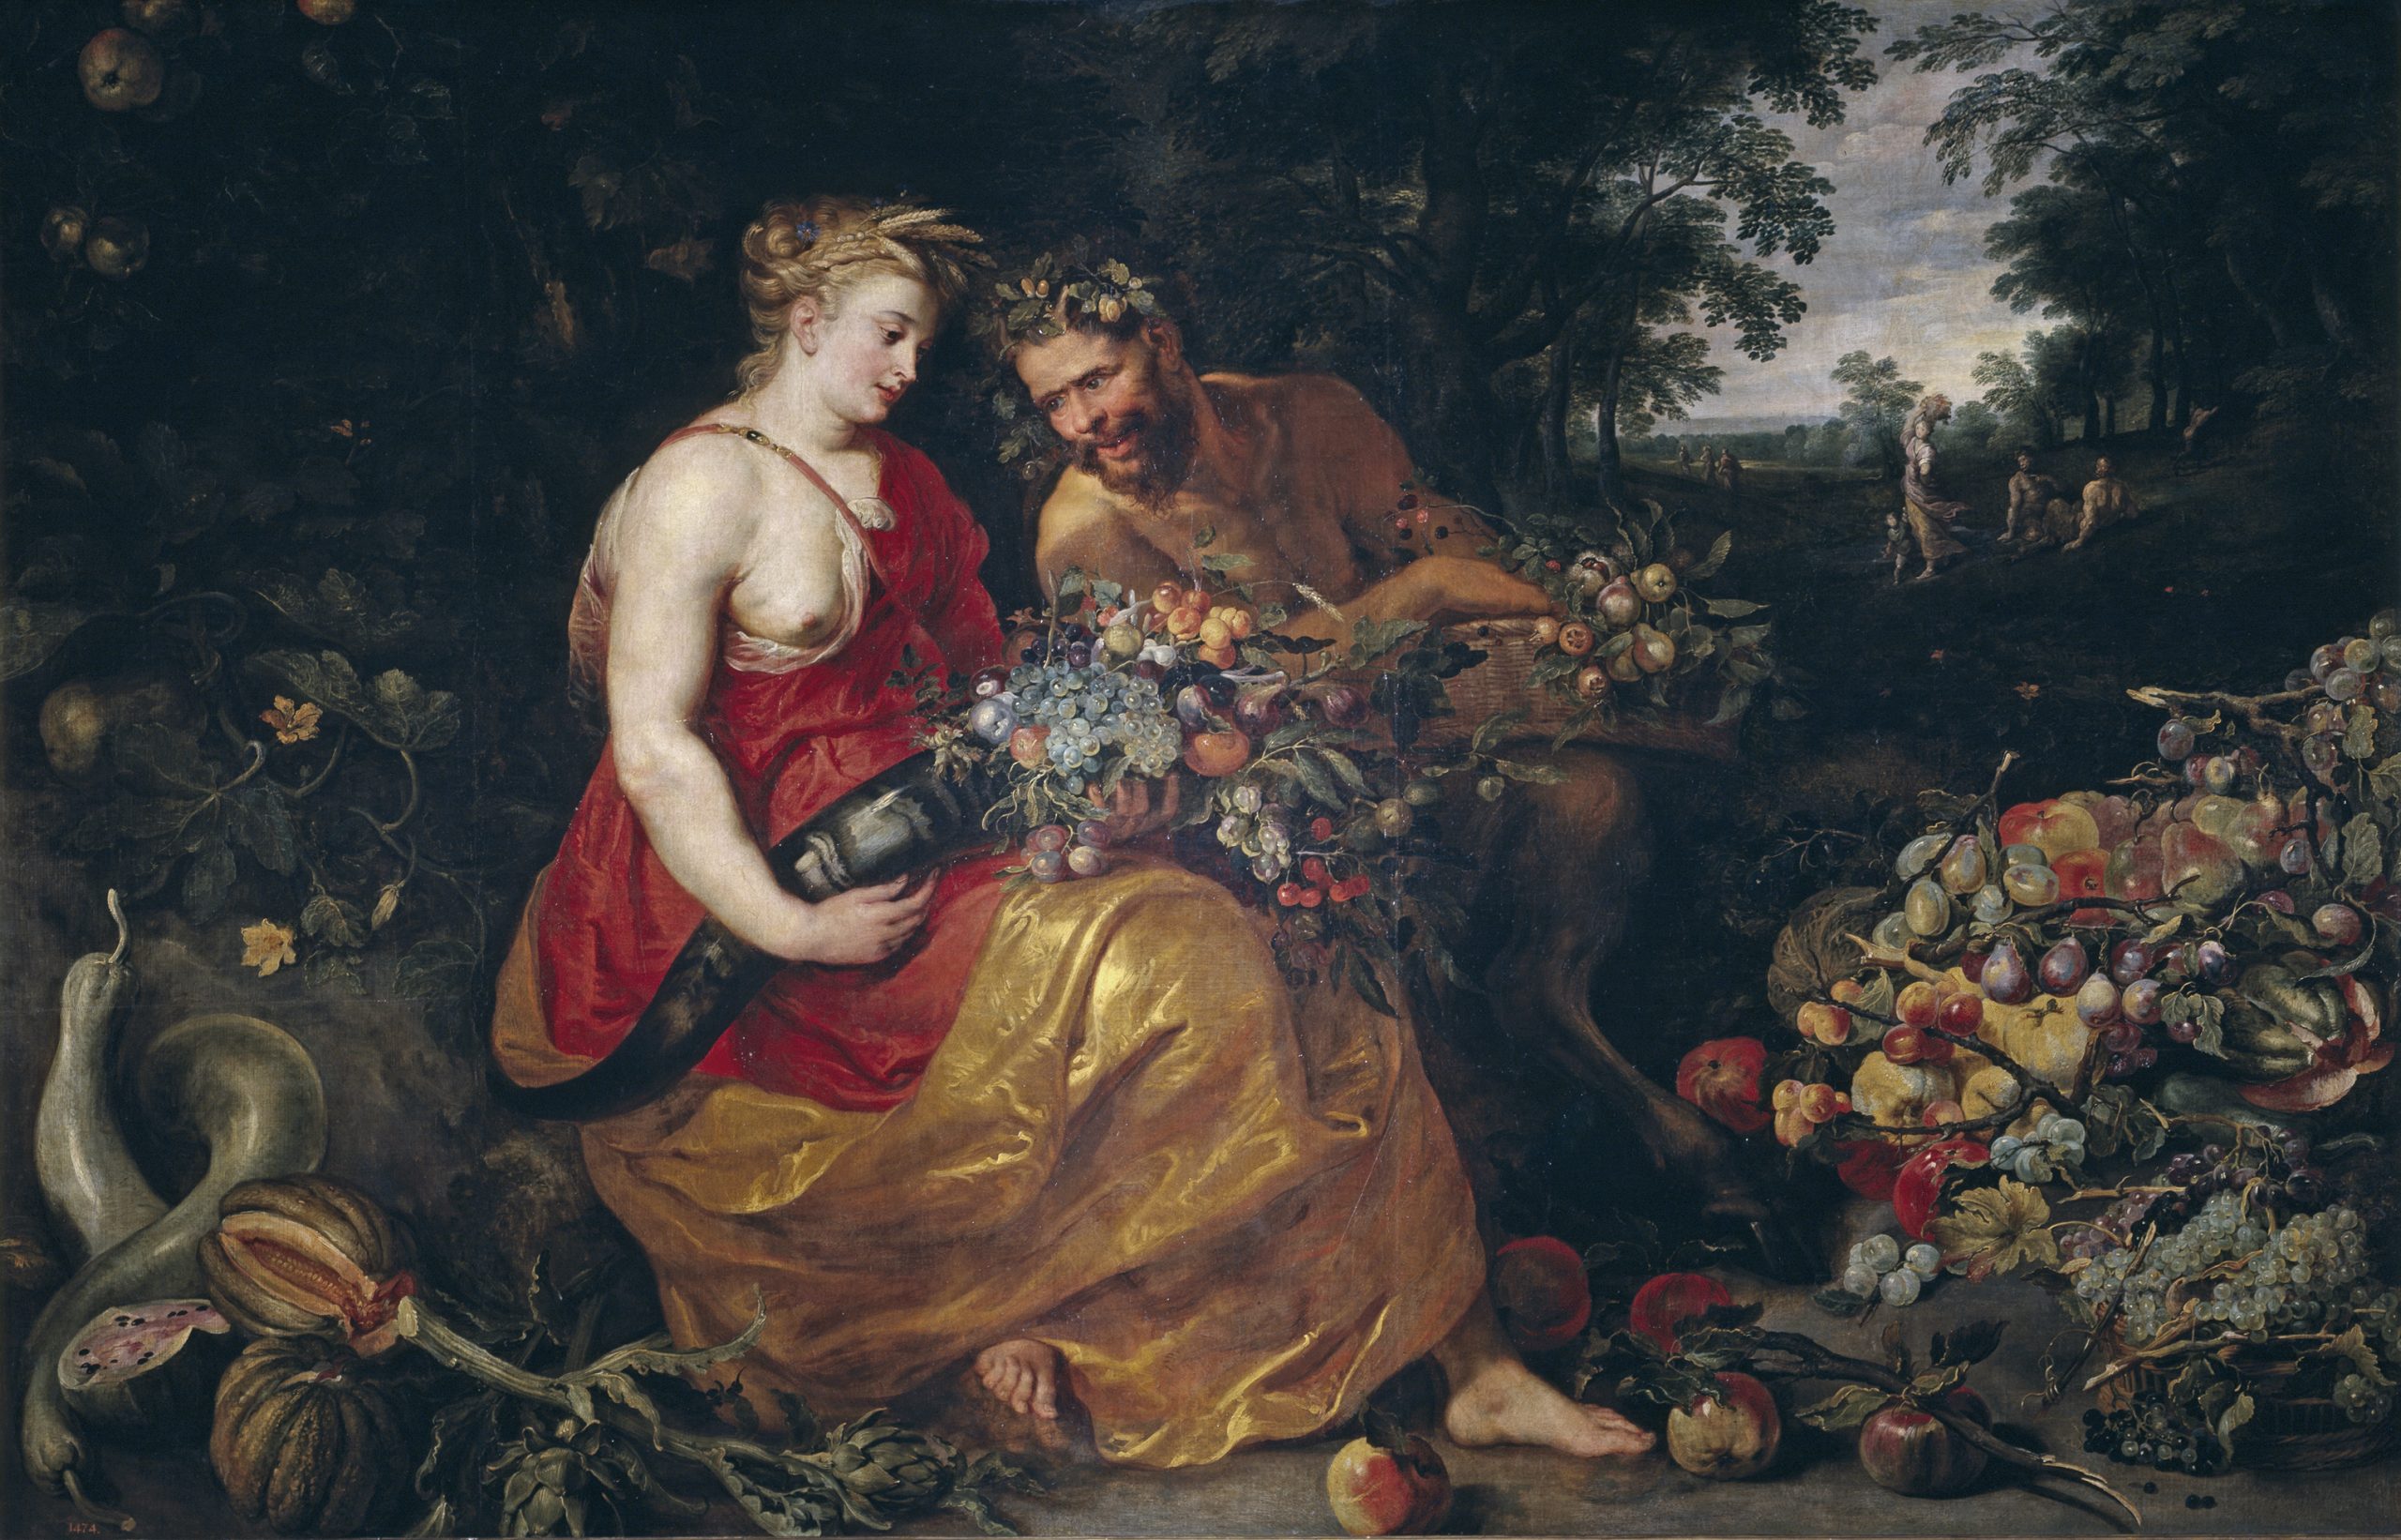 A woman sits holding a cornucopia of flowers while a man sits next to her, the couple sit in a forest surrounded by fruit.